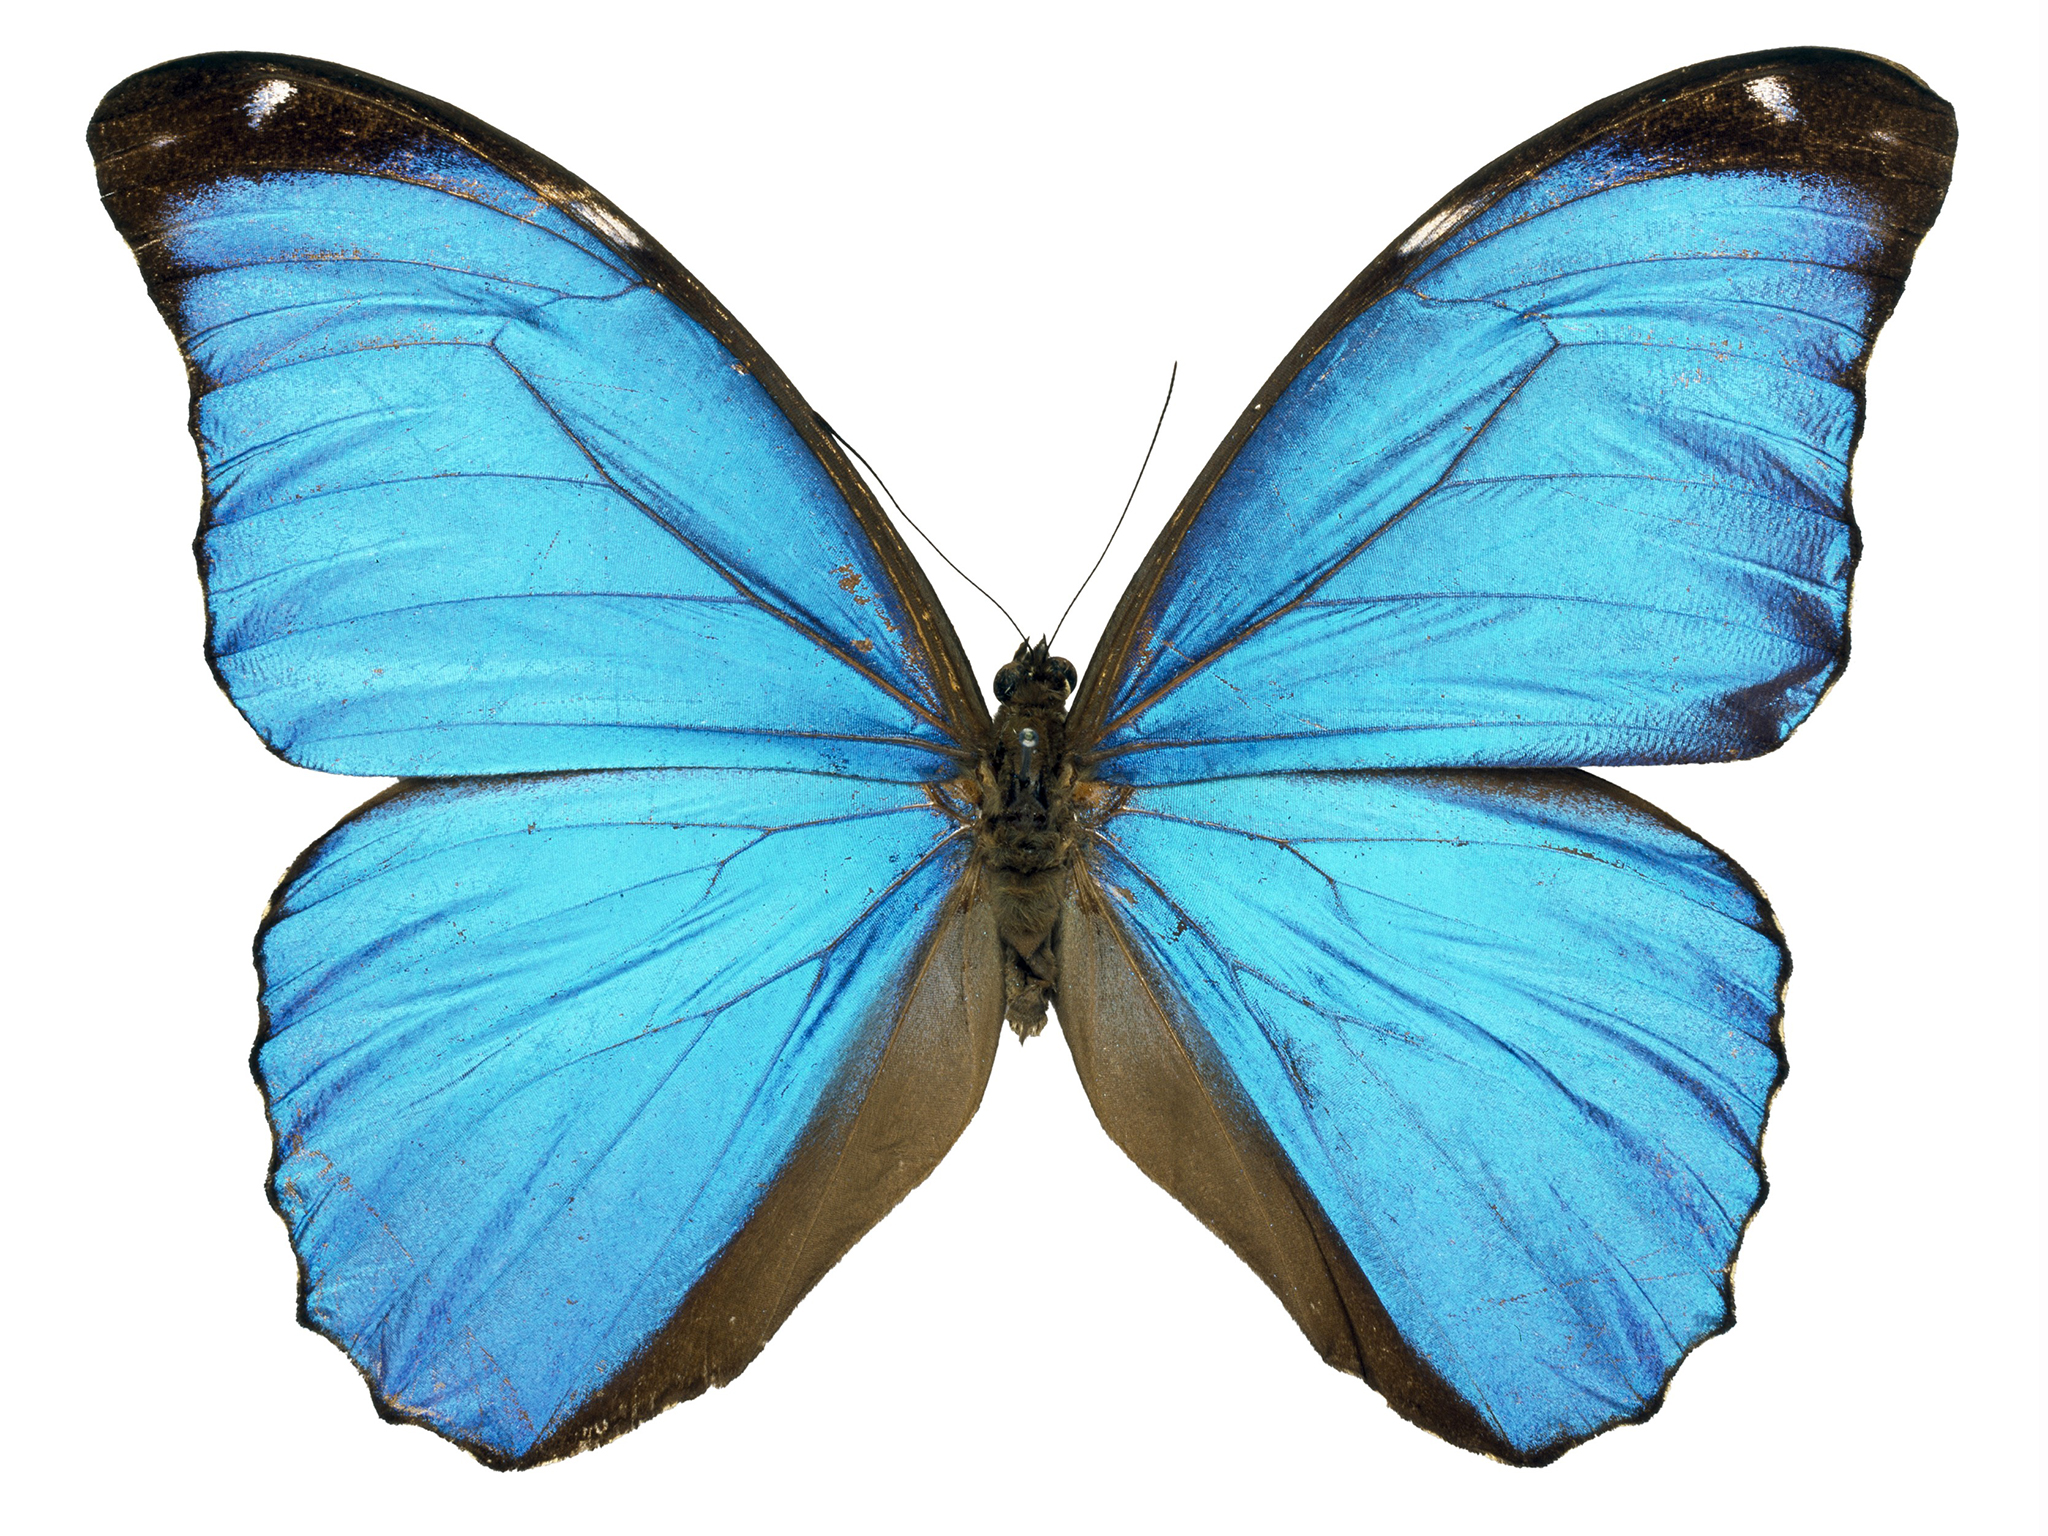 Scientist grows butterfly wing in laboratory - Science - News ...